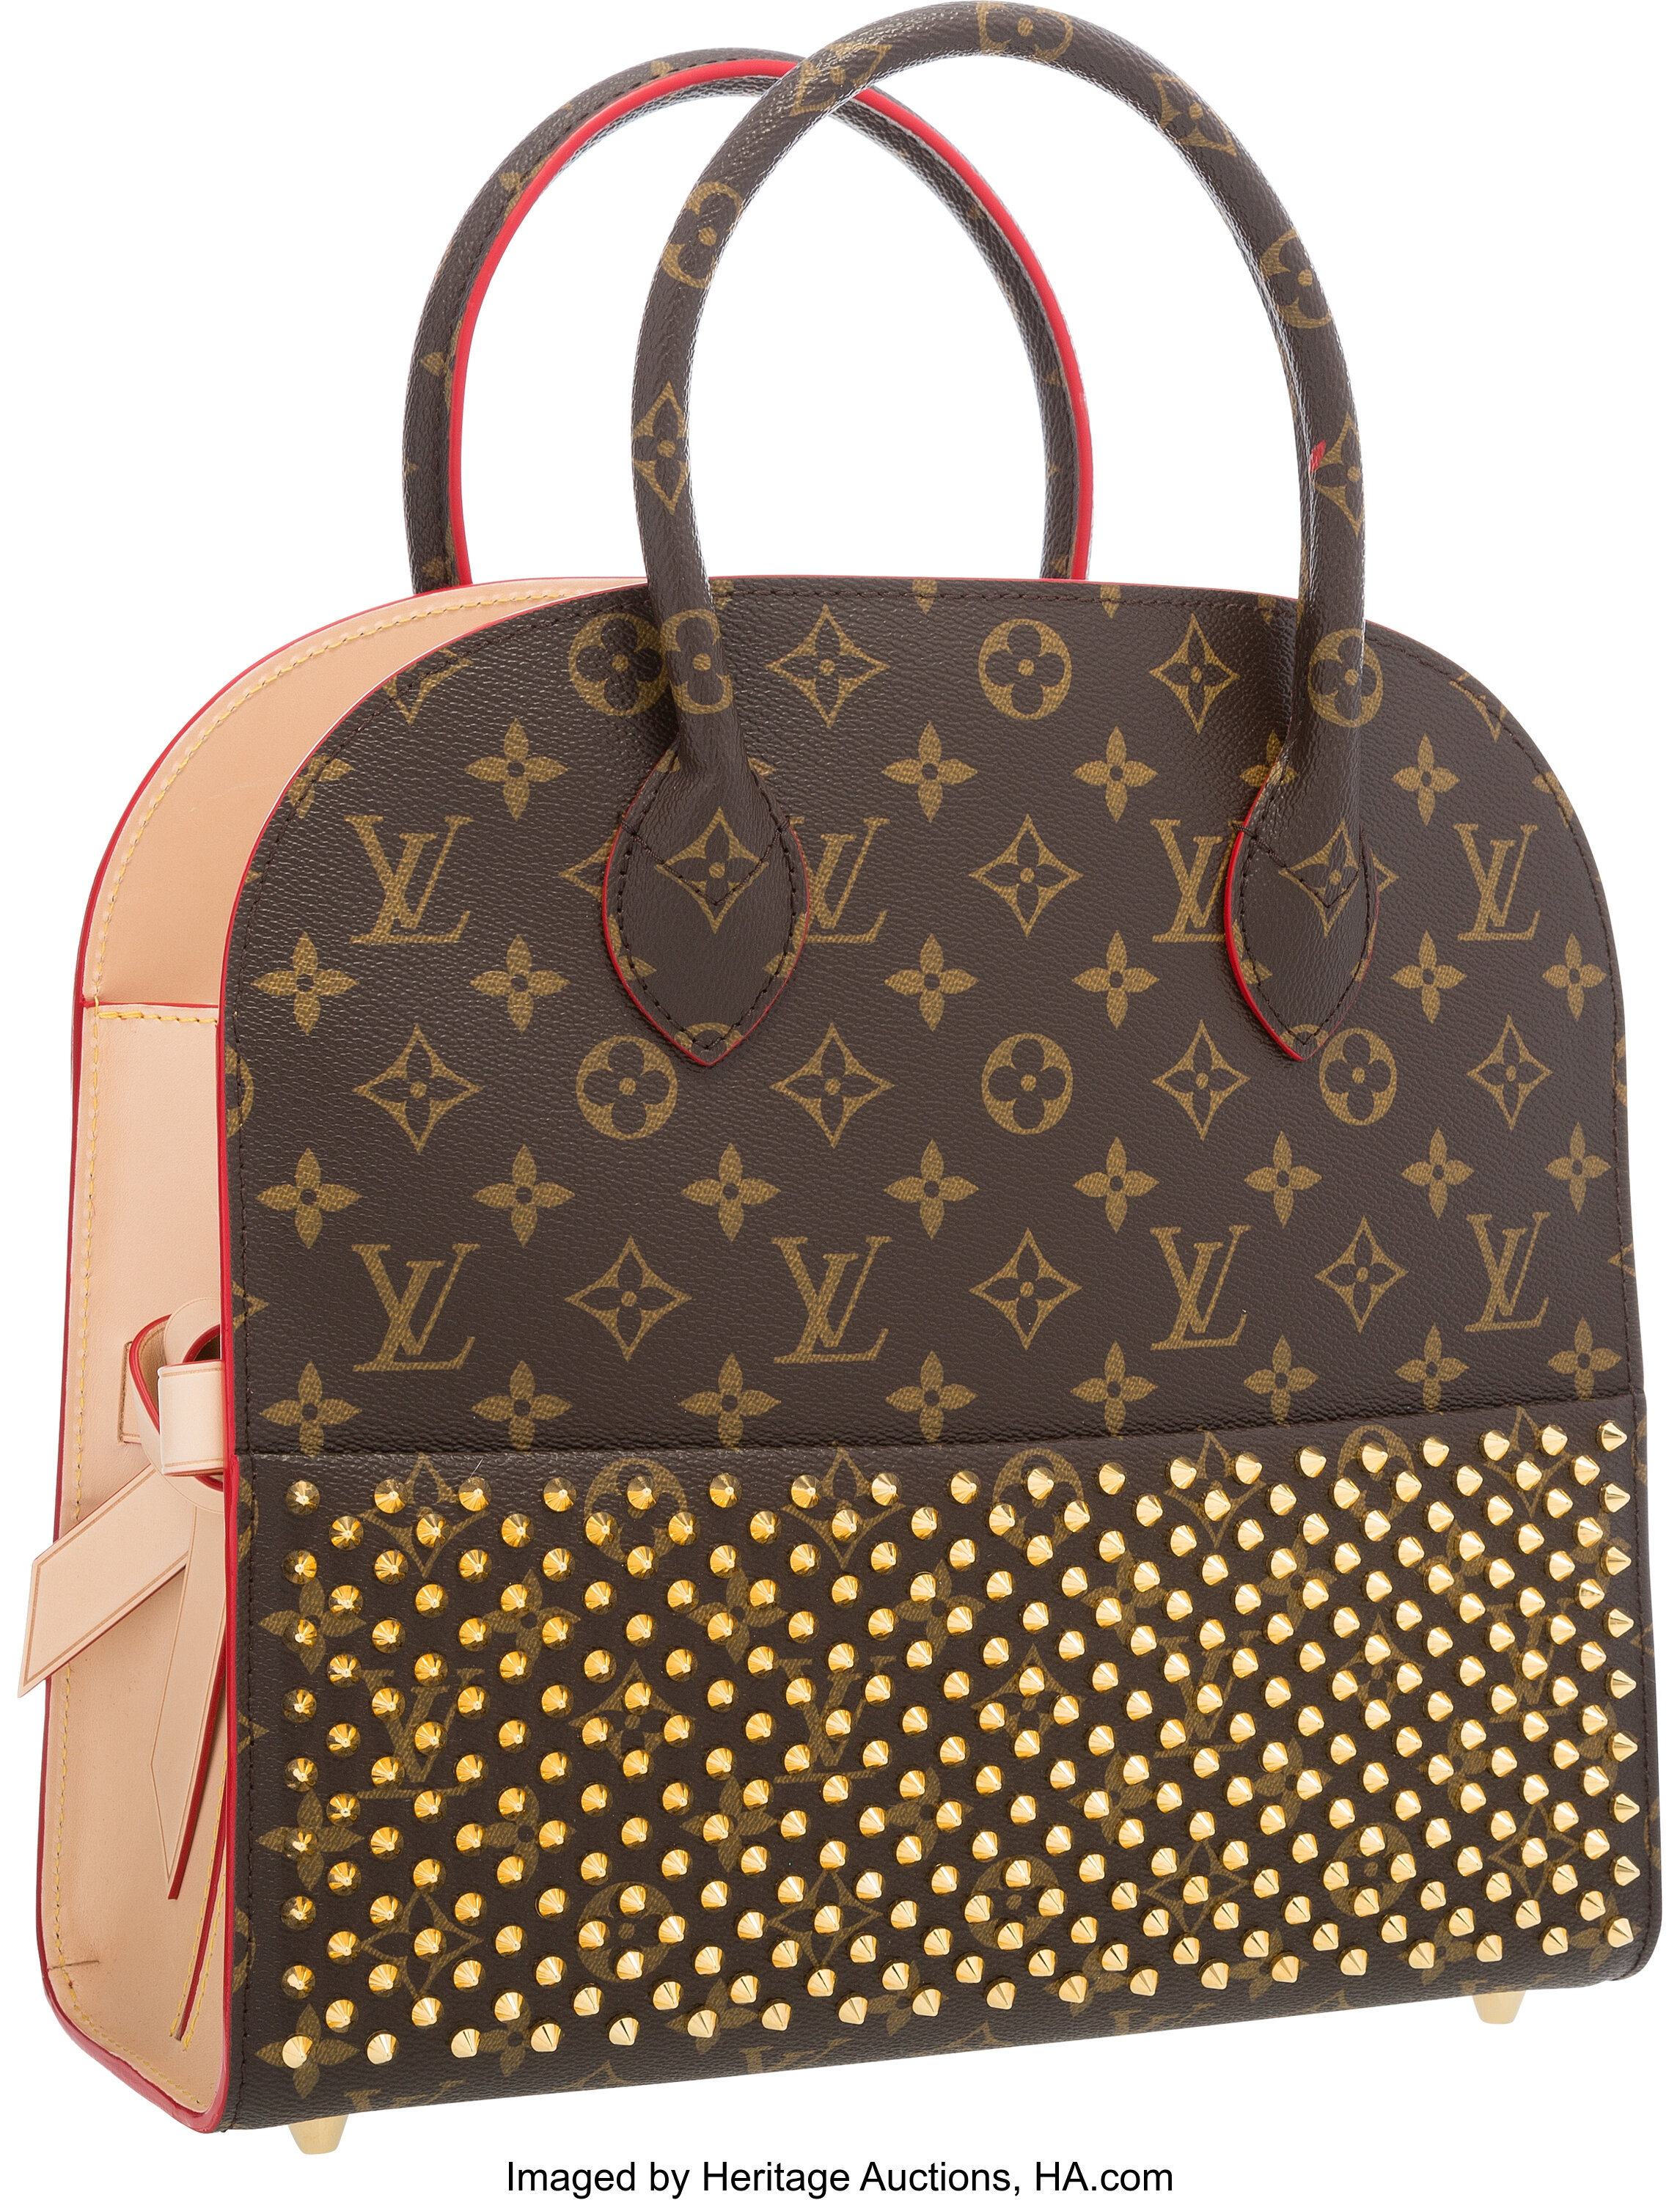 Louis by Christian Louboutin Celebrating Monogram | Lot Heritage Auctions